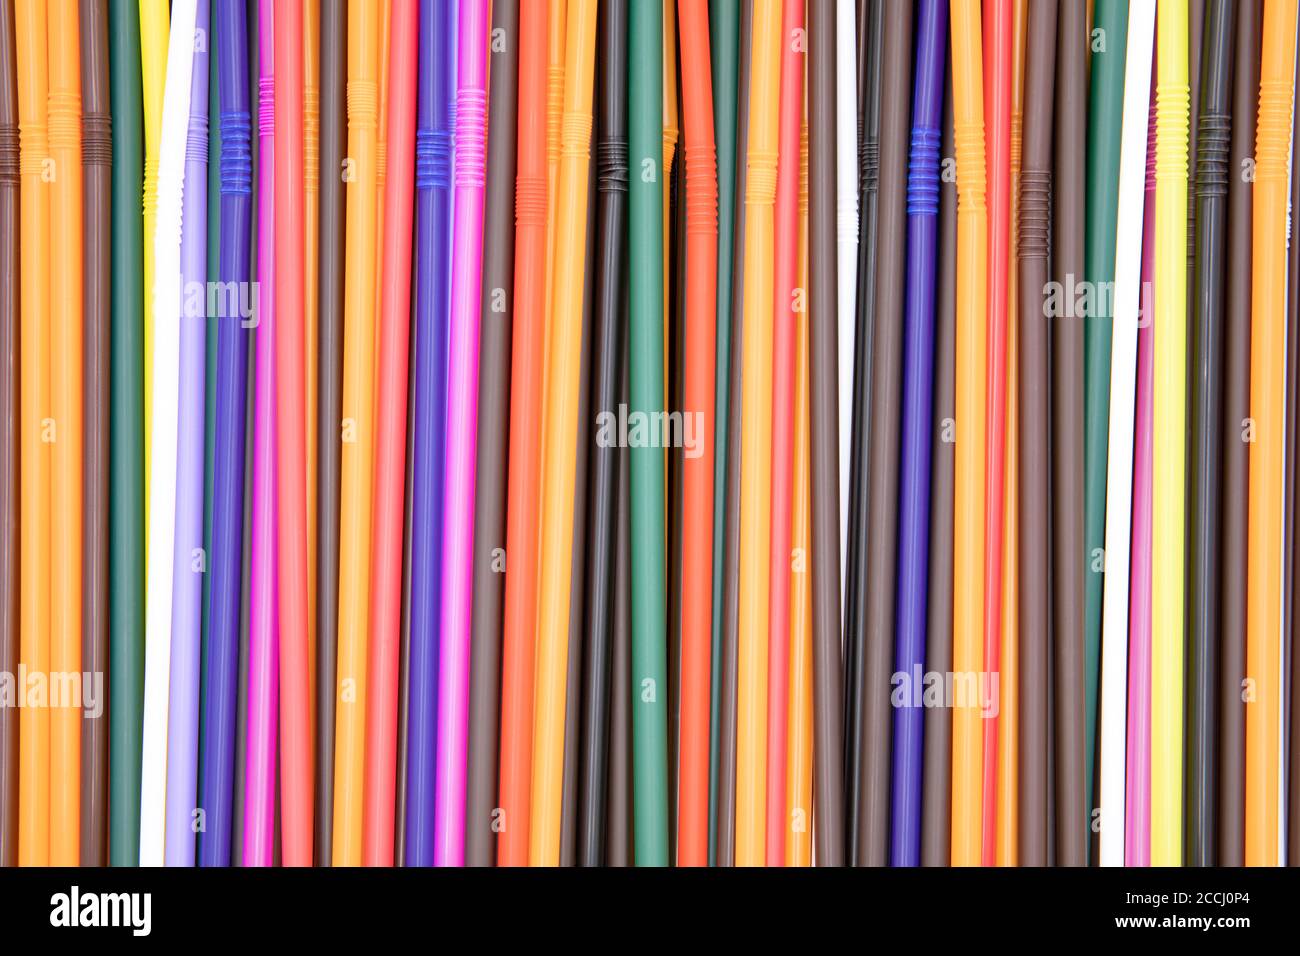 Colorful drinking straws texture or background Stock Photo